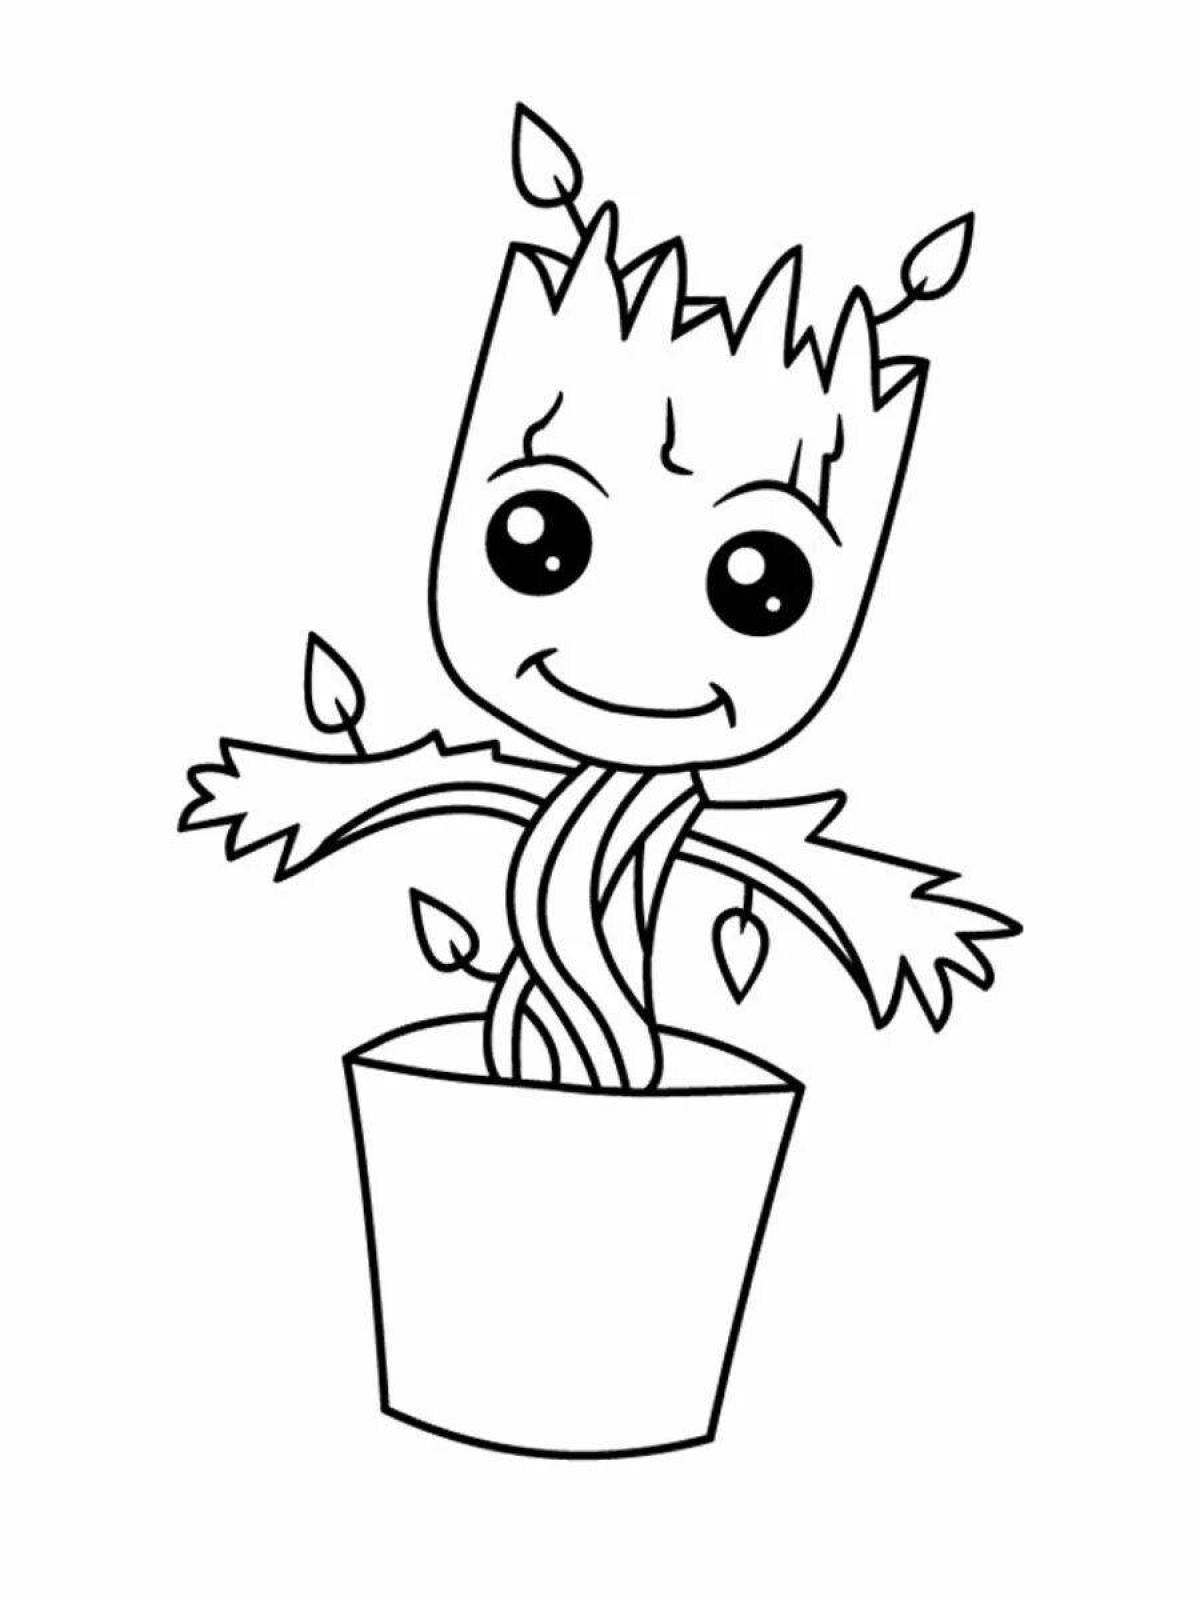 Cute coloring groot from marvel